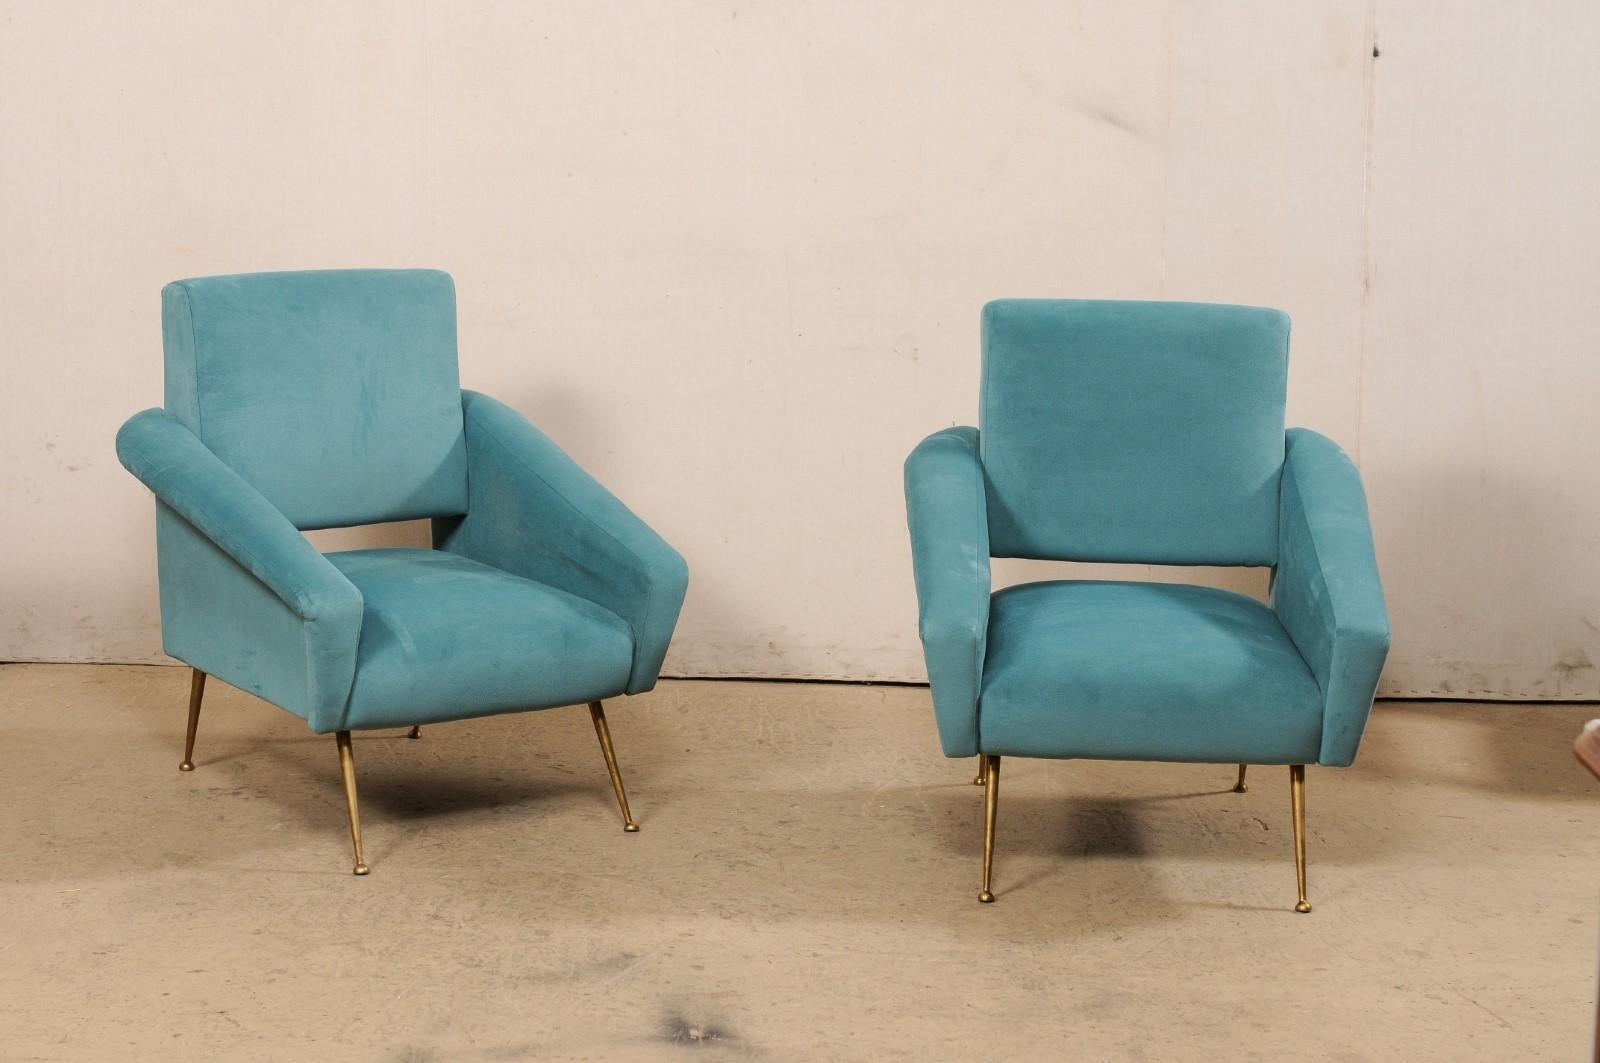 An Italian pair of chairs upholstered club chairs from the Mid-20th Century. These vintage arm chairs from Italy have a comfortably modern design with squared seats and backs, and full arms that angle downwards from the back sides towards their